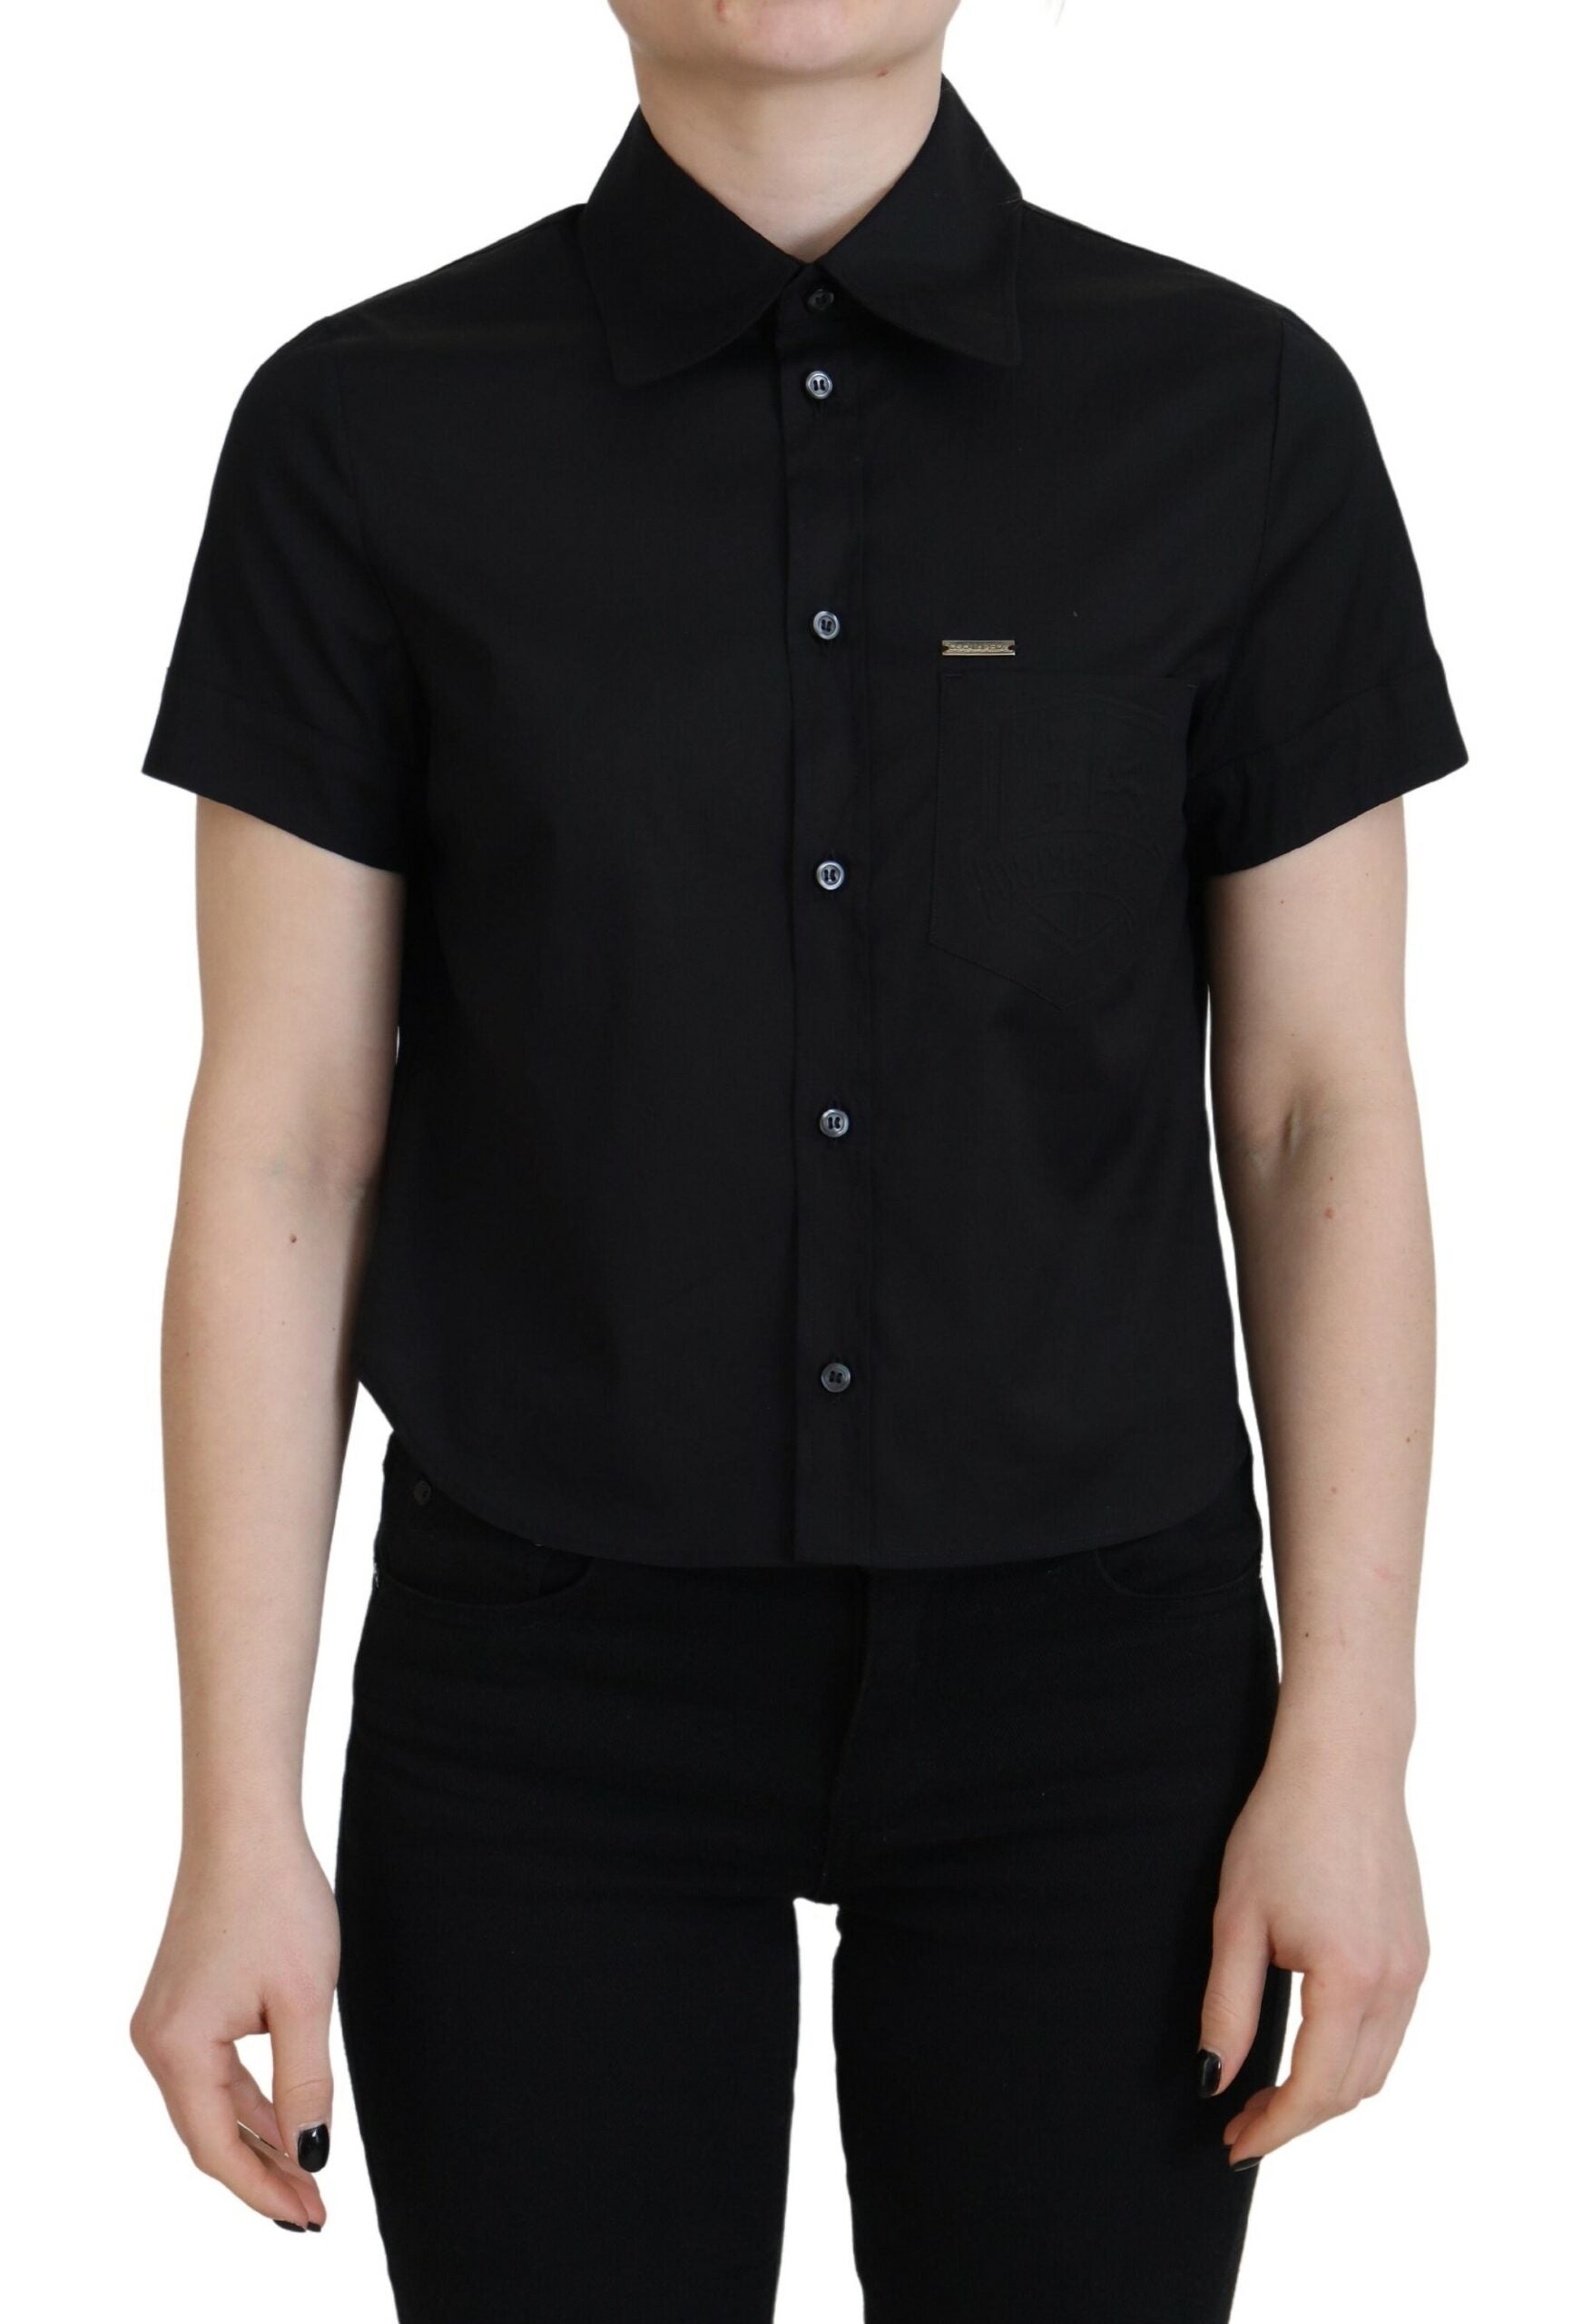 Dsquared² Black Collared Button Down Short Sleeves Polo Top